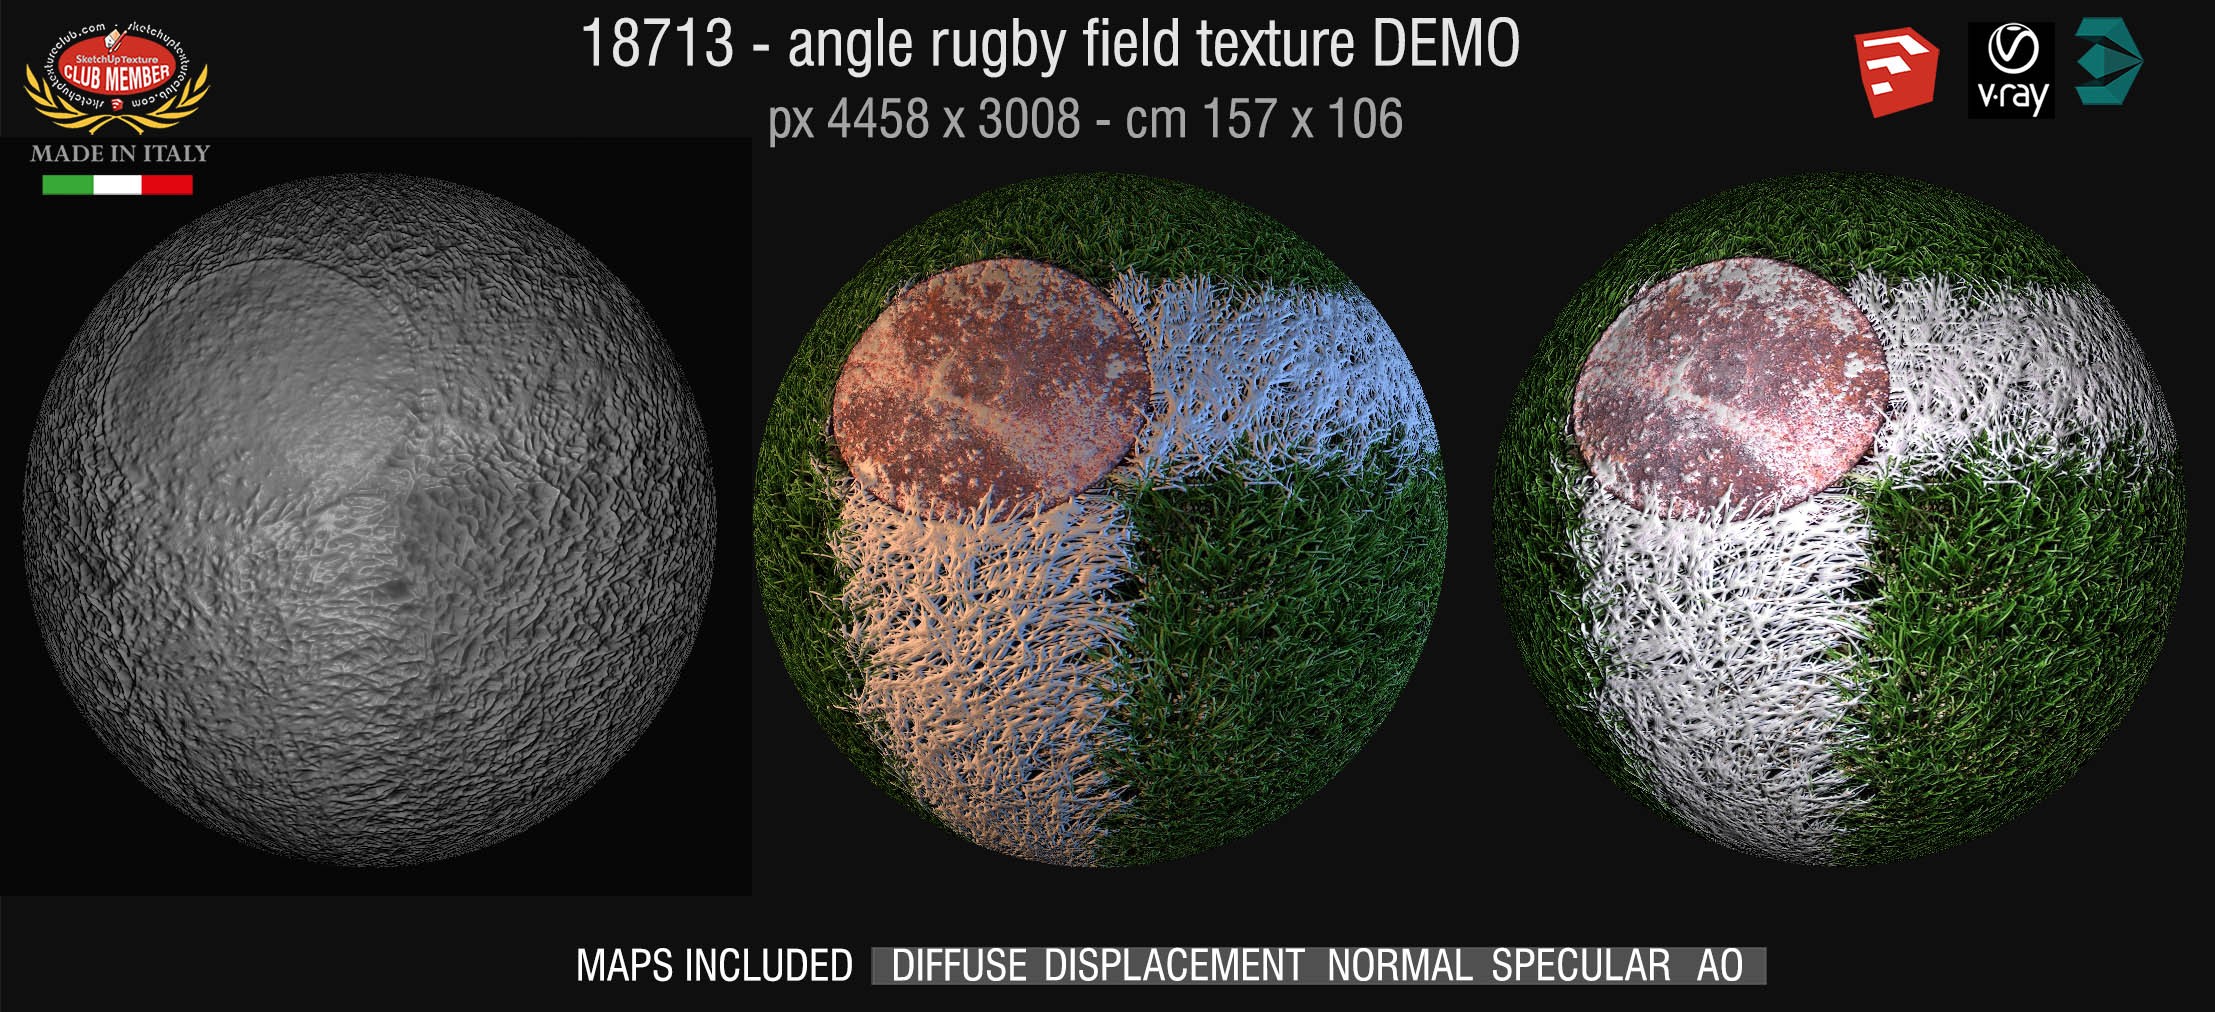 18713 HR Angle rugby field texture + maps DEMO